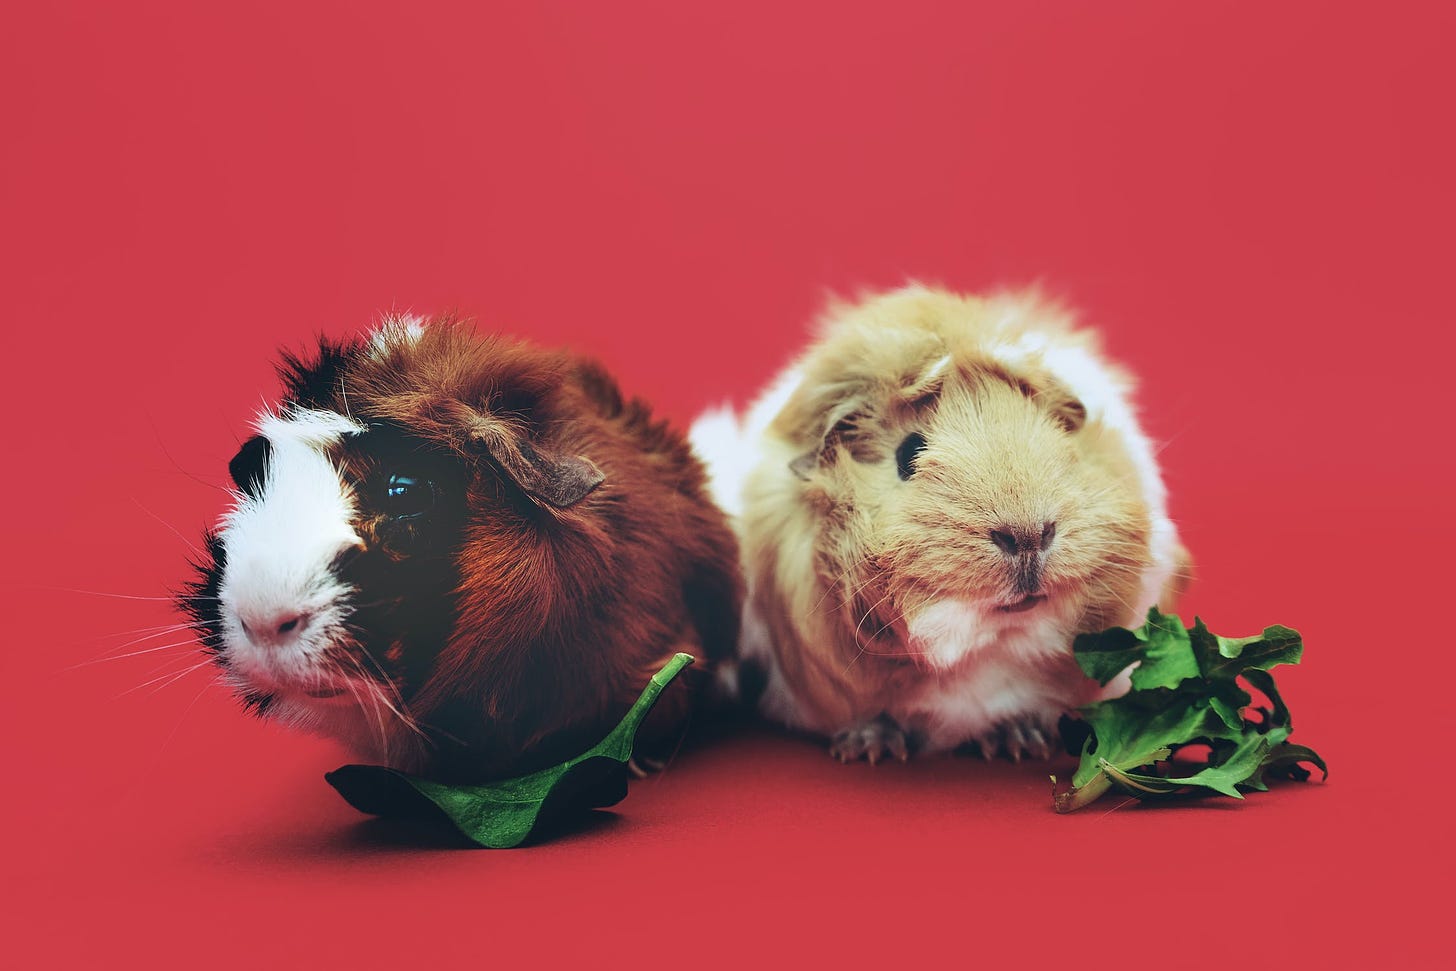 Two adorable guinea pigs who are not being subjected to science. 